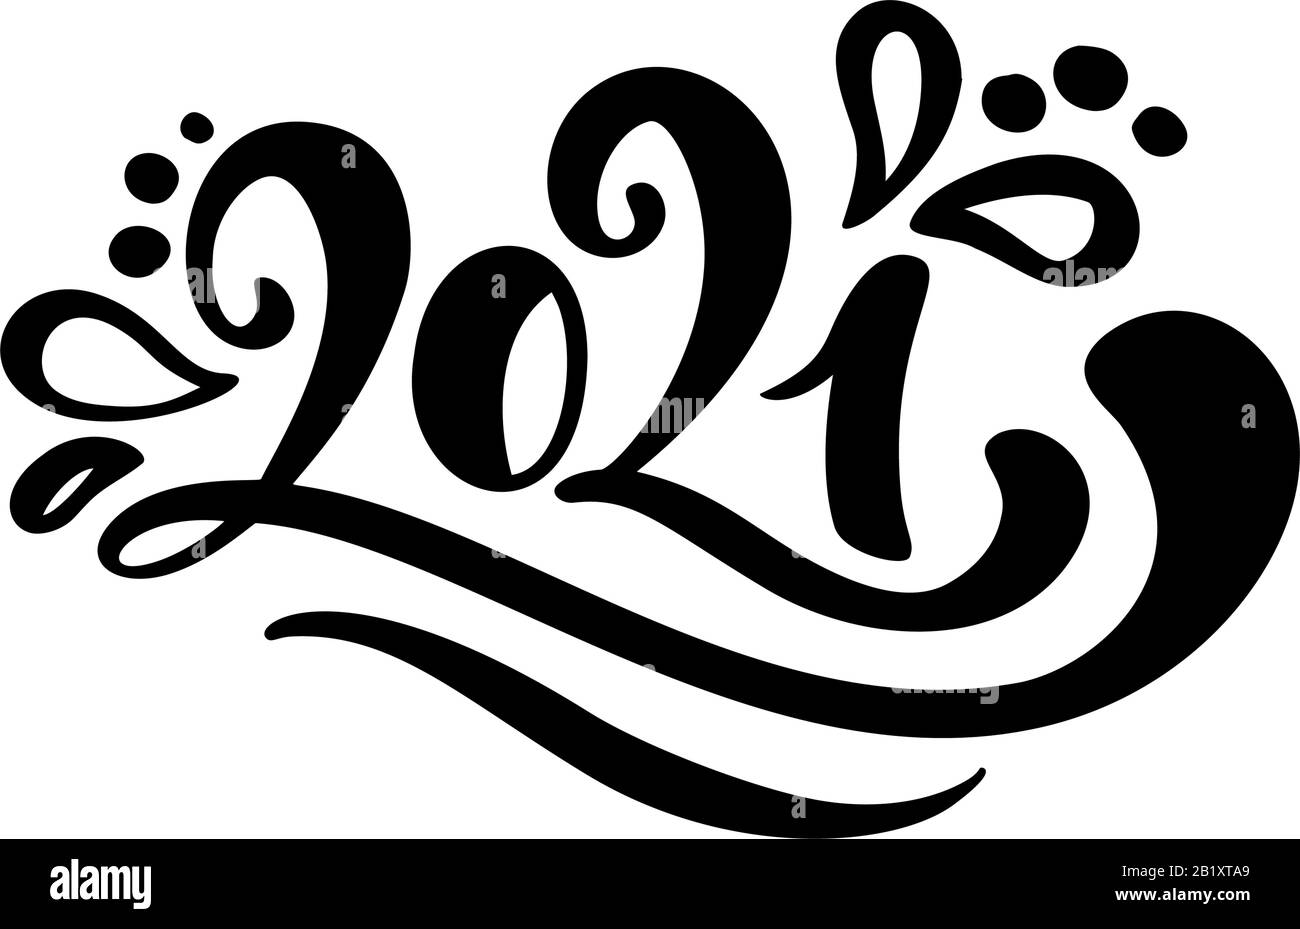 Vector calligraphic 2021 text. Christmas and Happy New Year concept design with calligraphy brush text on white background. Hand drawn lettering Stock Vector